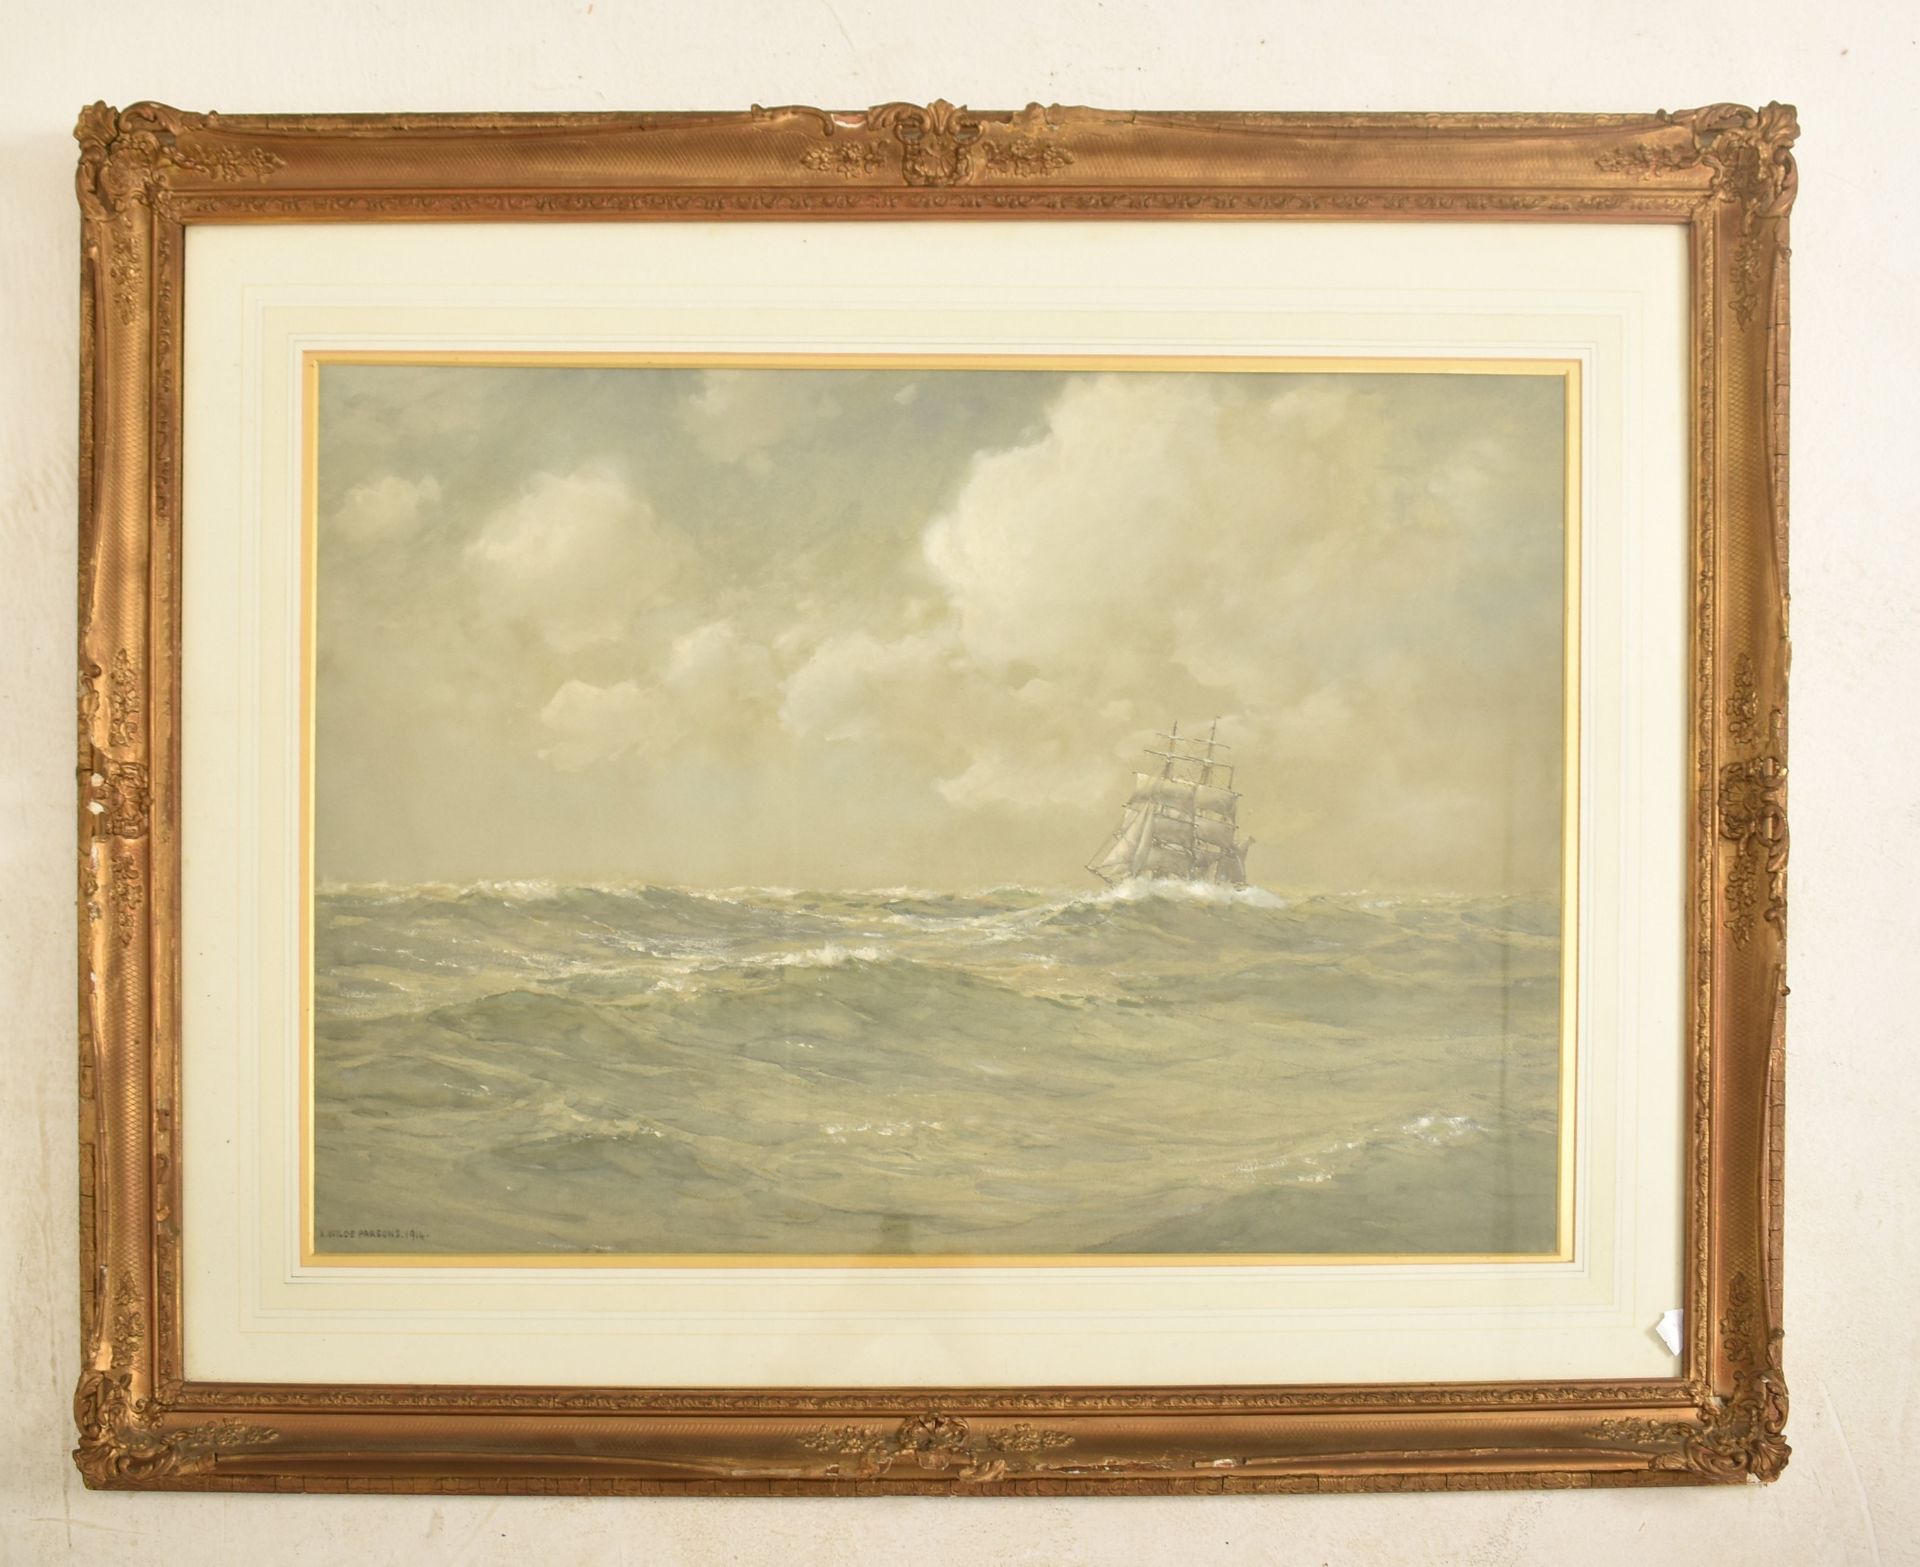 ARTHUR WILDE PARSONS (1854-1931) - WATERCOLOUR ON PAPER PAINTING - Image 2 of 6